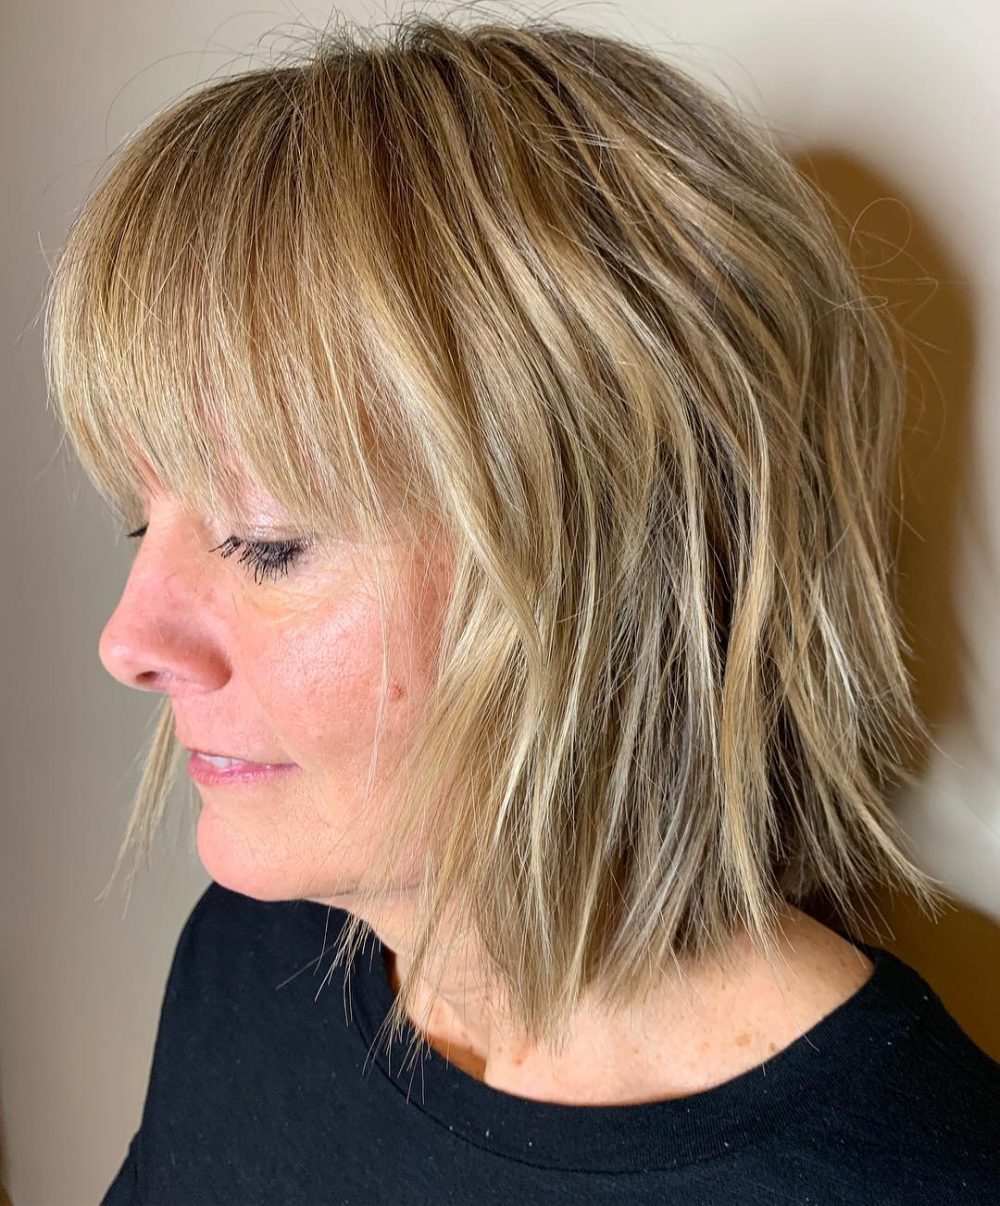 45 Cute & Youthful Short Hairstyles for Women Over 50